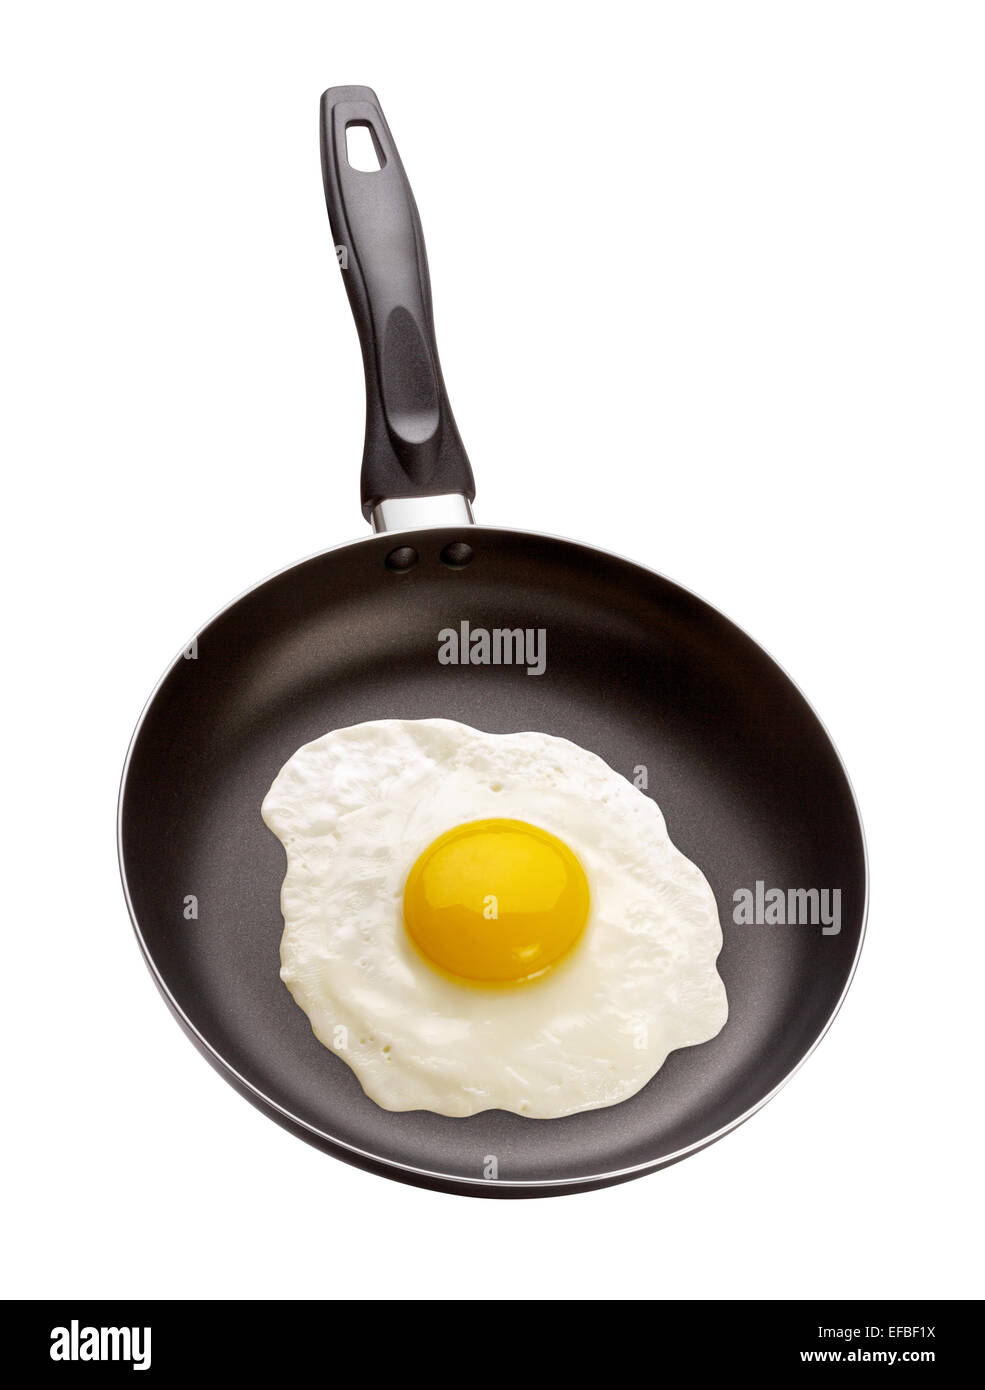 Fried Egg in a Pan isolated on white. The image is in full focus, front to back. Stock Photo